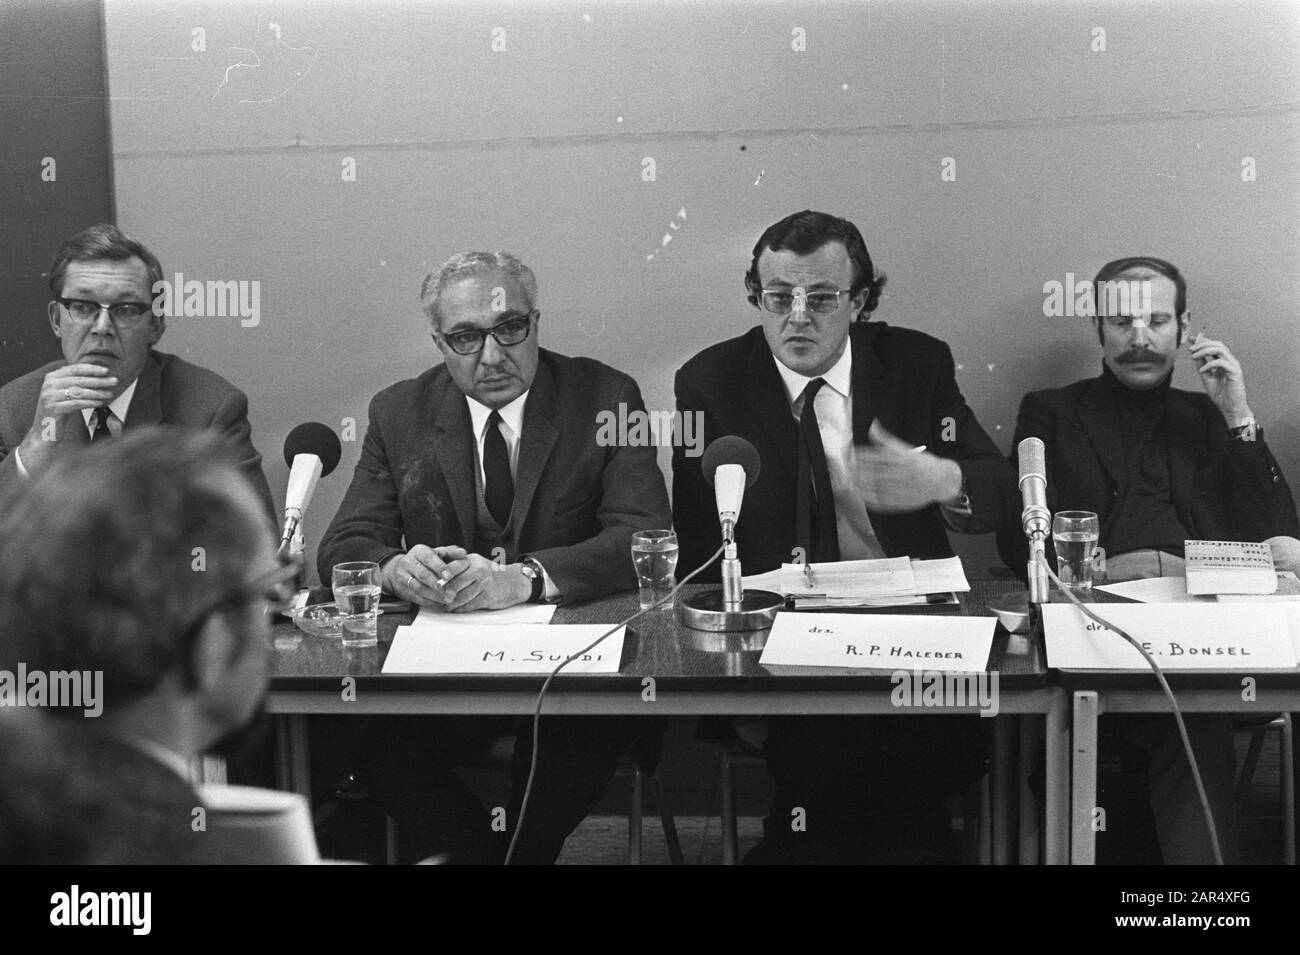 Forum on anti-Zionism and anti-Semitism in the Anne Frank House Amsterdam. M. Suidi (Palestinian) (Chairman), dr. P. Haleber, dr. E. Bonsel Date: 22 December 1969 Location: Amsterdam, Noord-Holland Keywords: FORA, members of the forum Person: Bonsel, E., Haleber, R.P., Suidi, M. Stock Photo